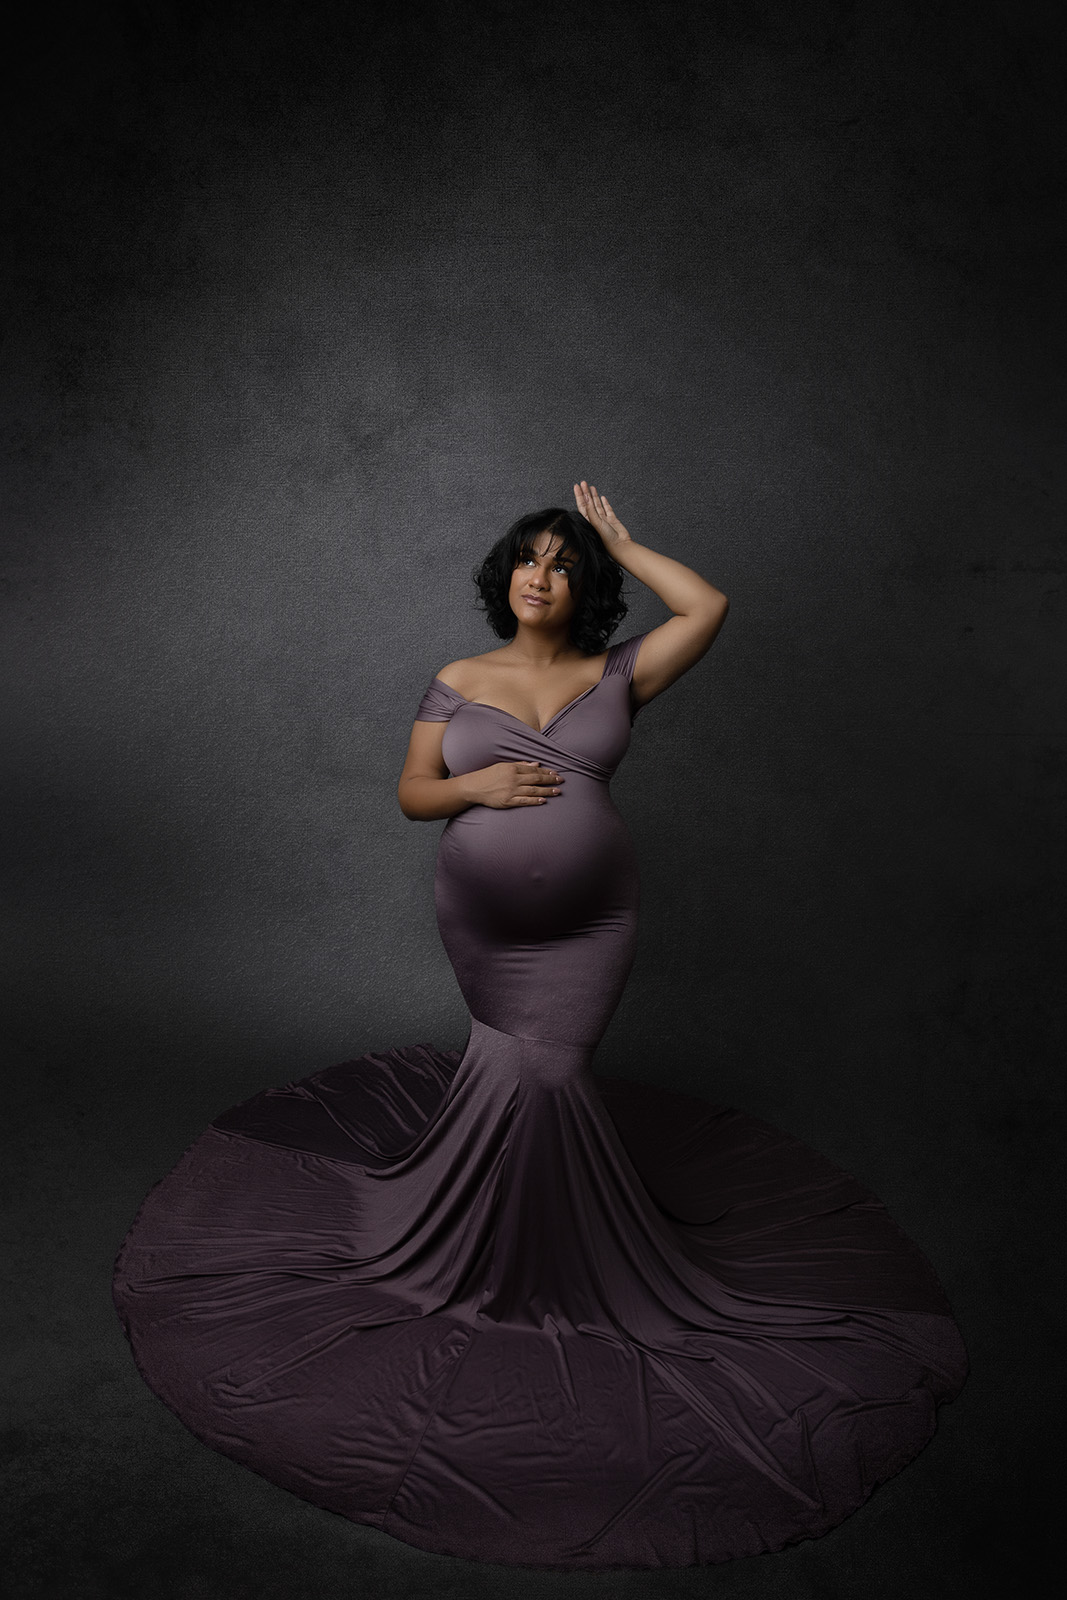 Mom to be is wearing an elegant purple dress from Chicaboo